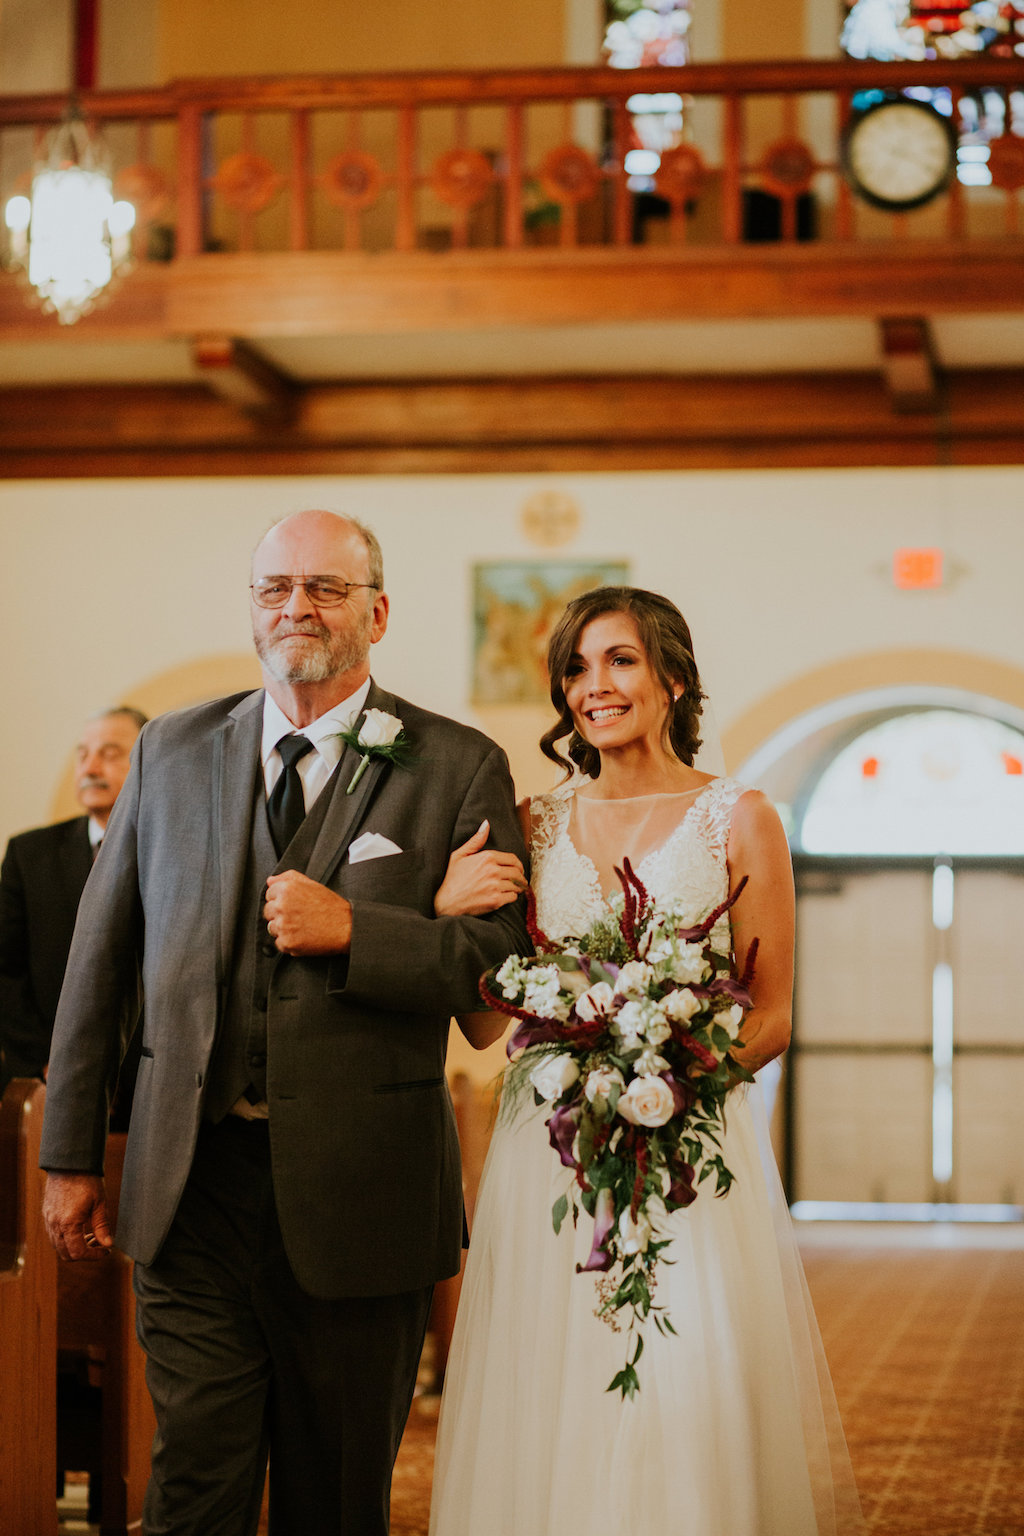 Bride Waking Down the Aisle Wedding Ceremony Portrait | Tampa Bay Wedding Venue Our Lady of Perpetual Help Catholic Church